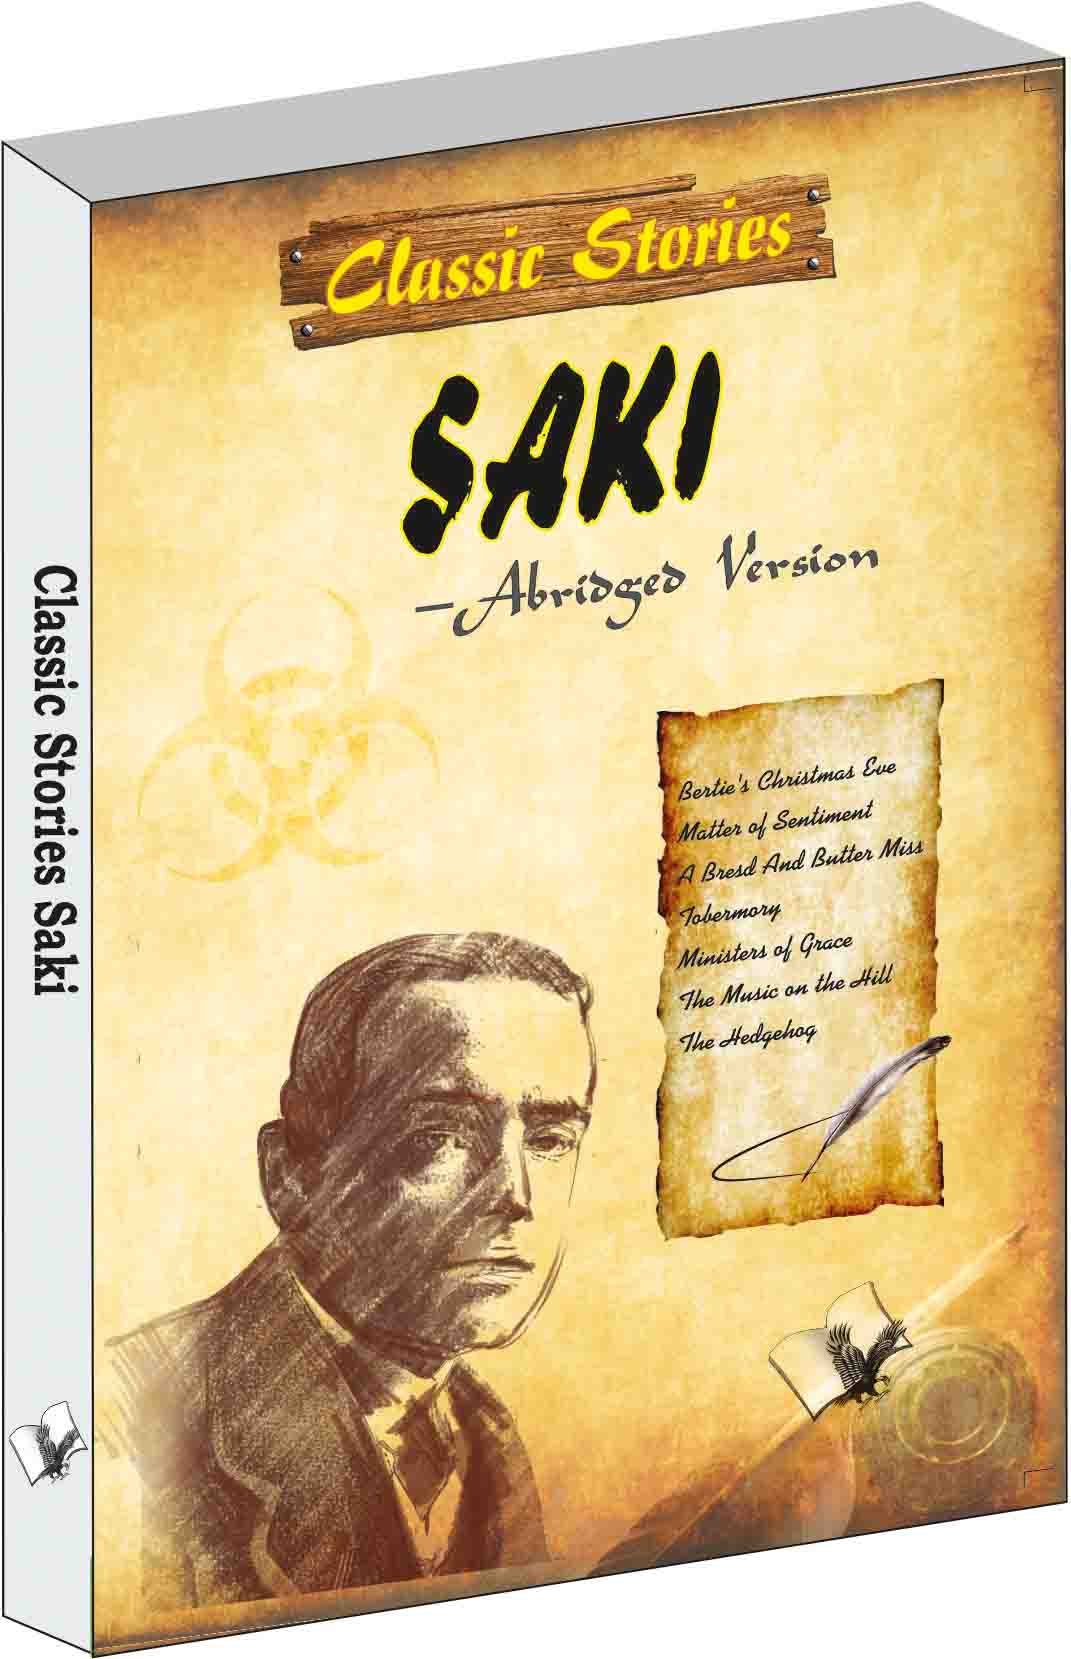 Classic Stories of Saki-Popular and exciting stories